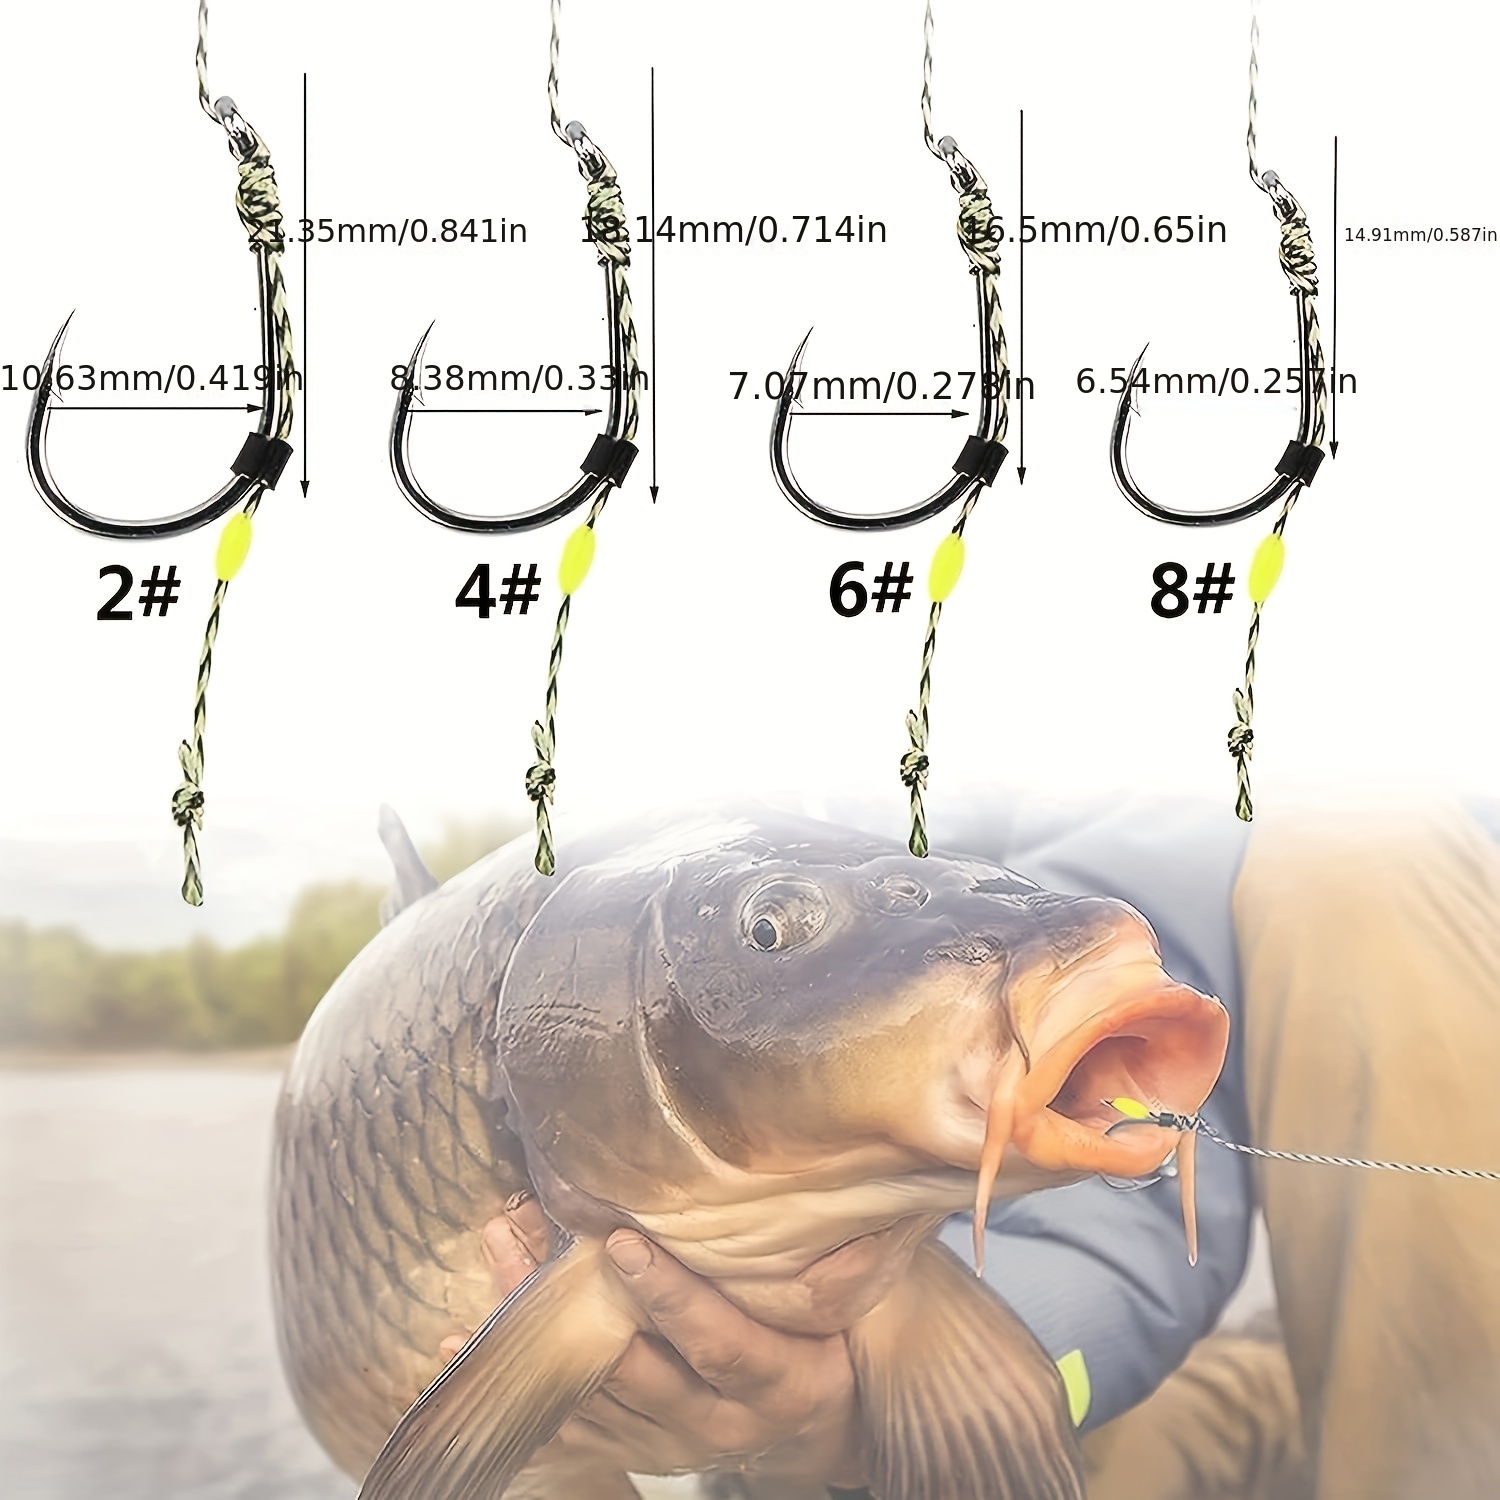 Carp Fishing Hair Rigs Kit- 24pcs Curved Barbed Carp Hook High Carbon Steel  Fishing Bait Rigs Leader Boilies Fishing Rigs with Braided Thread Line